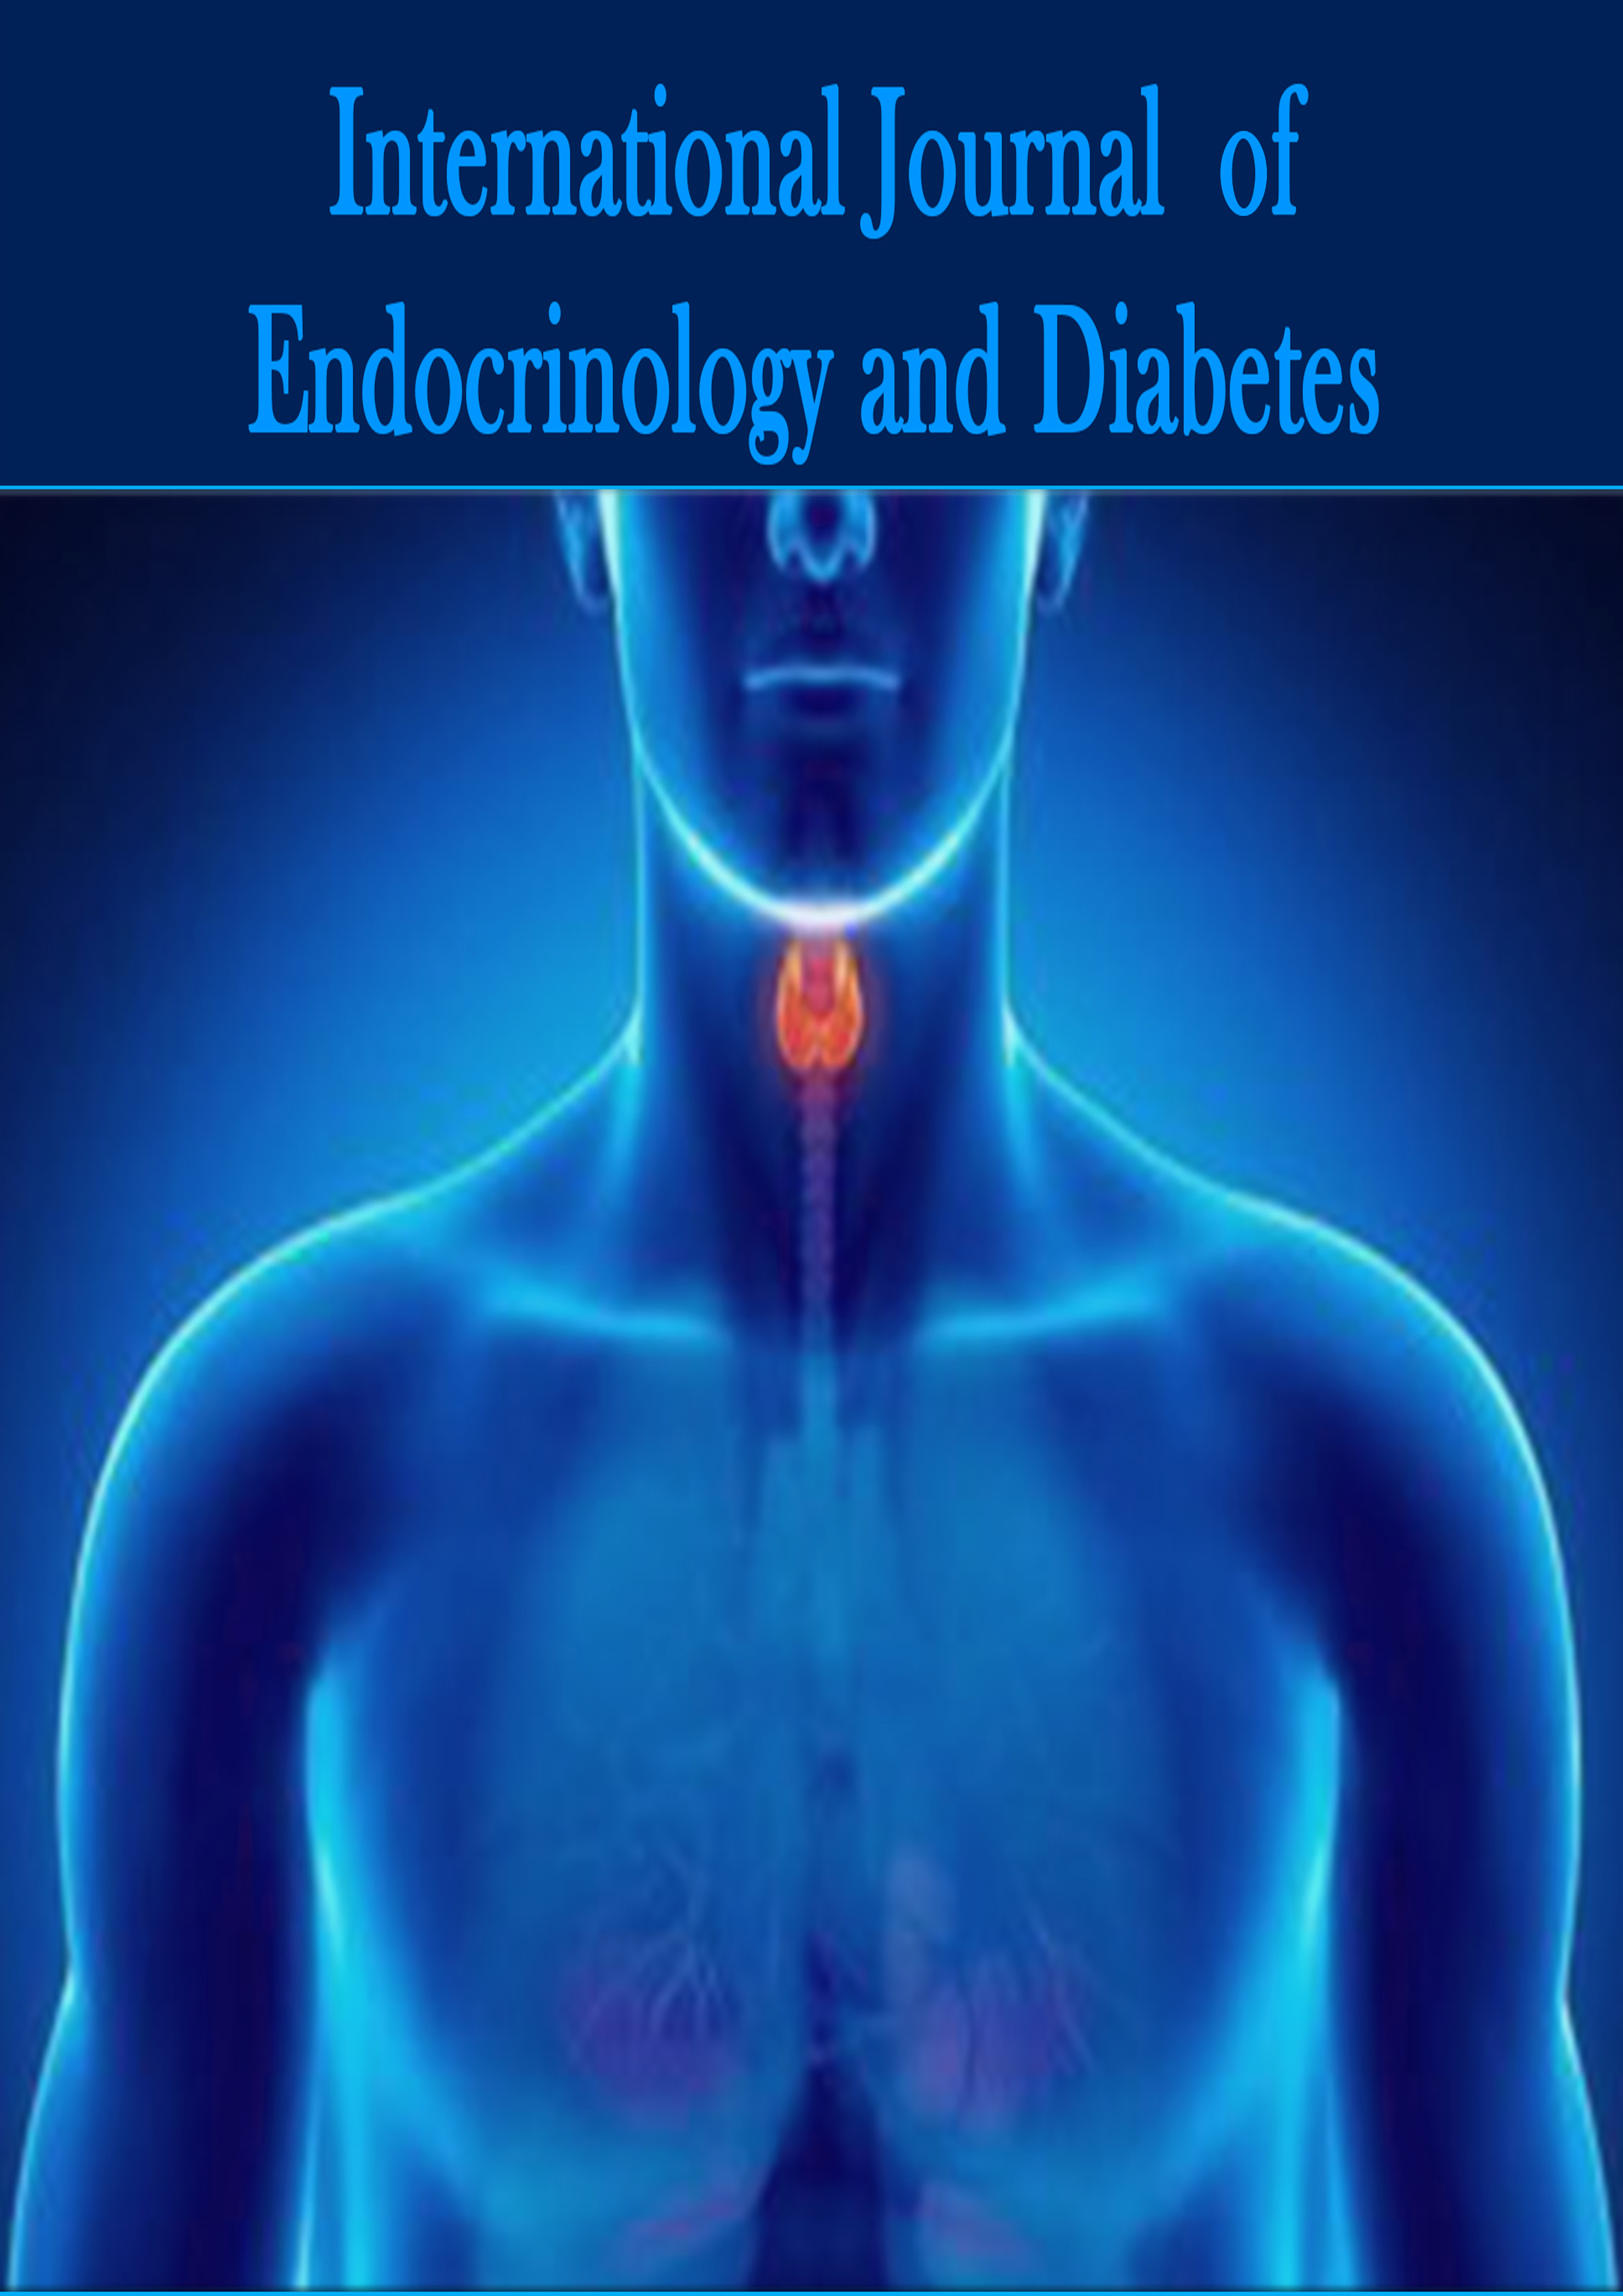 International Journal of Endocrinology and Diabetes